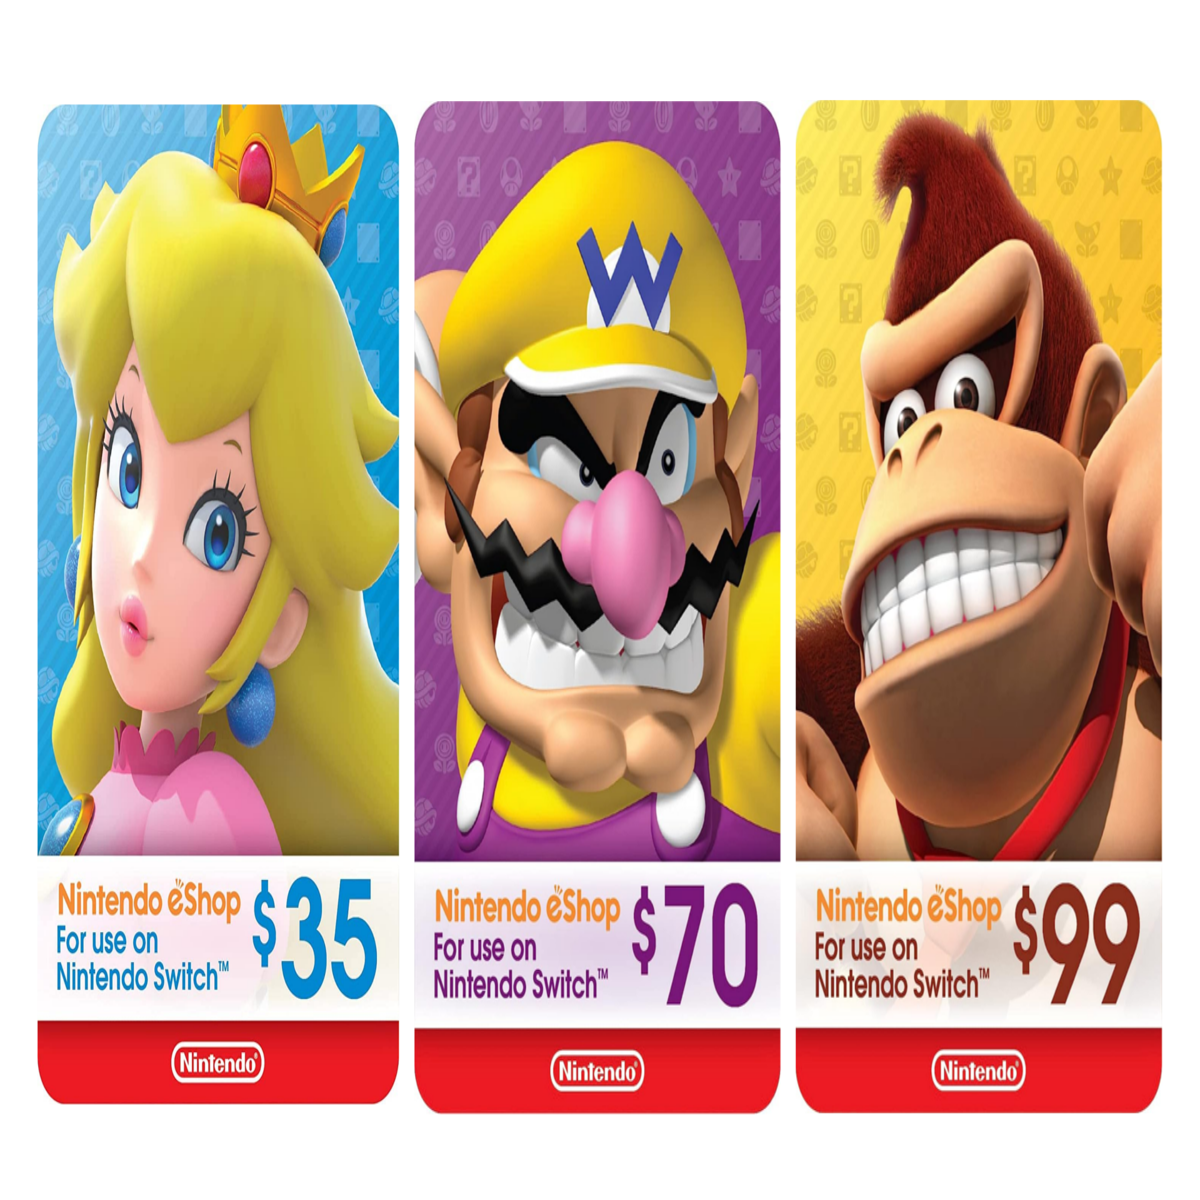 Fry's / USA] Nintendo eShop card - $50 credit for $40  $10 off w/ Promo  Code (2.2.19 ONLY) : r/NintendoSwitchDeals